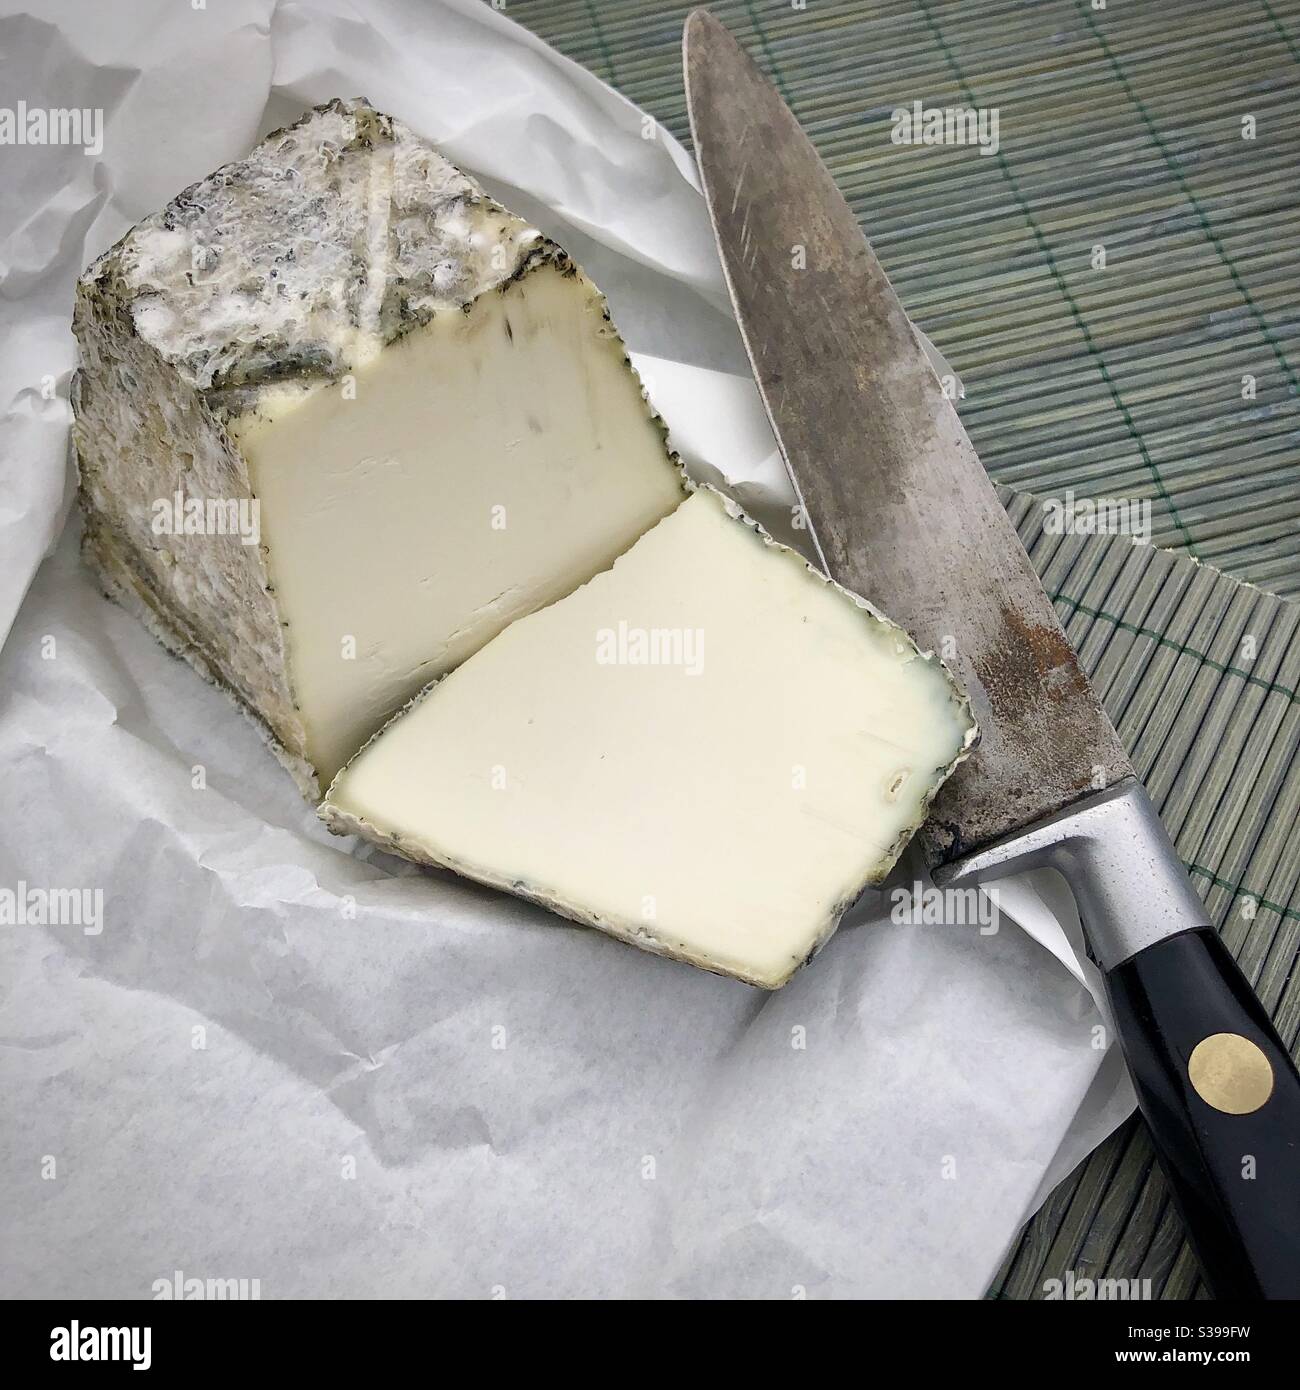 Slice of French pyramid shaped goat’s cheese. Stock Photo